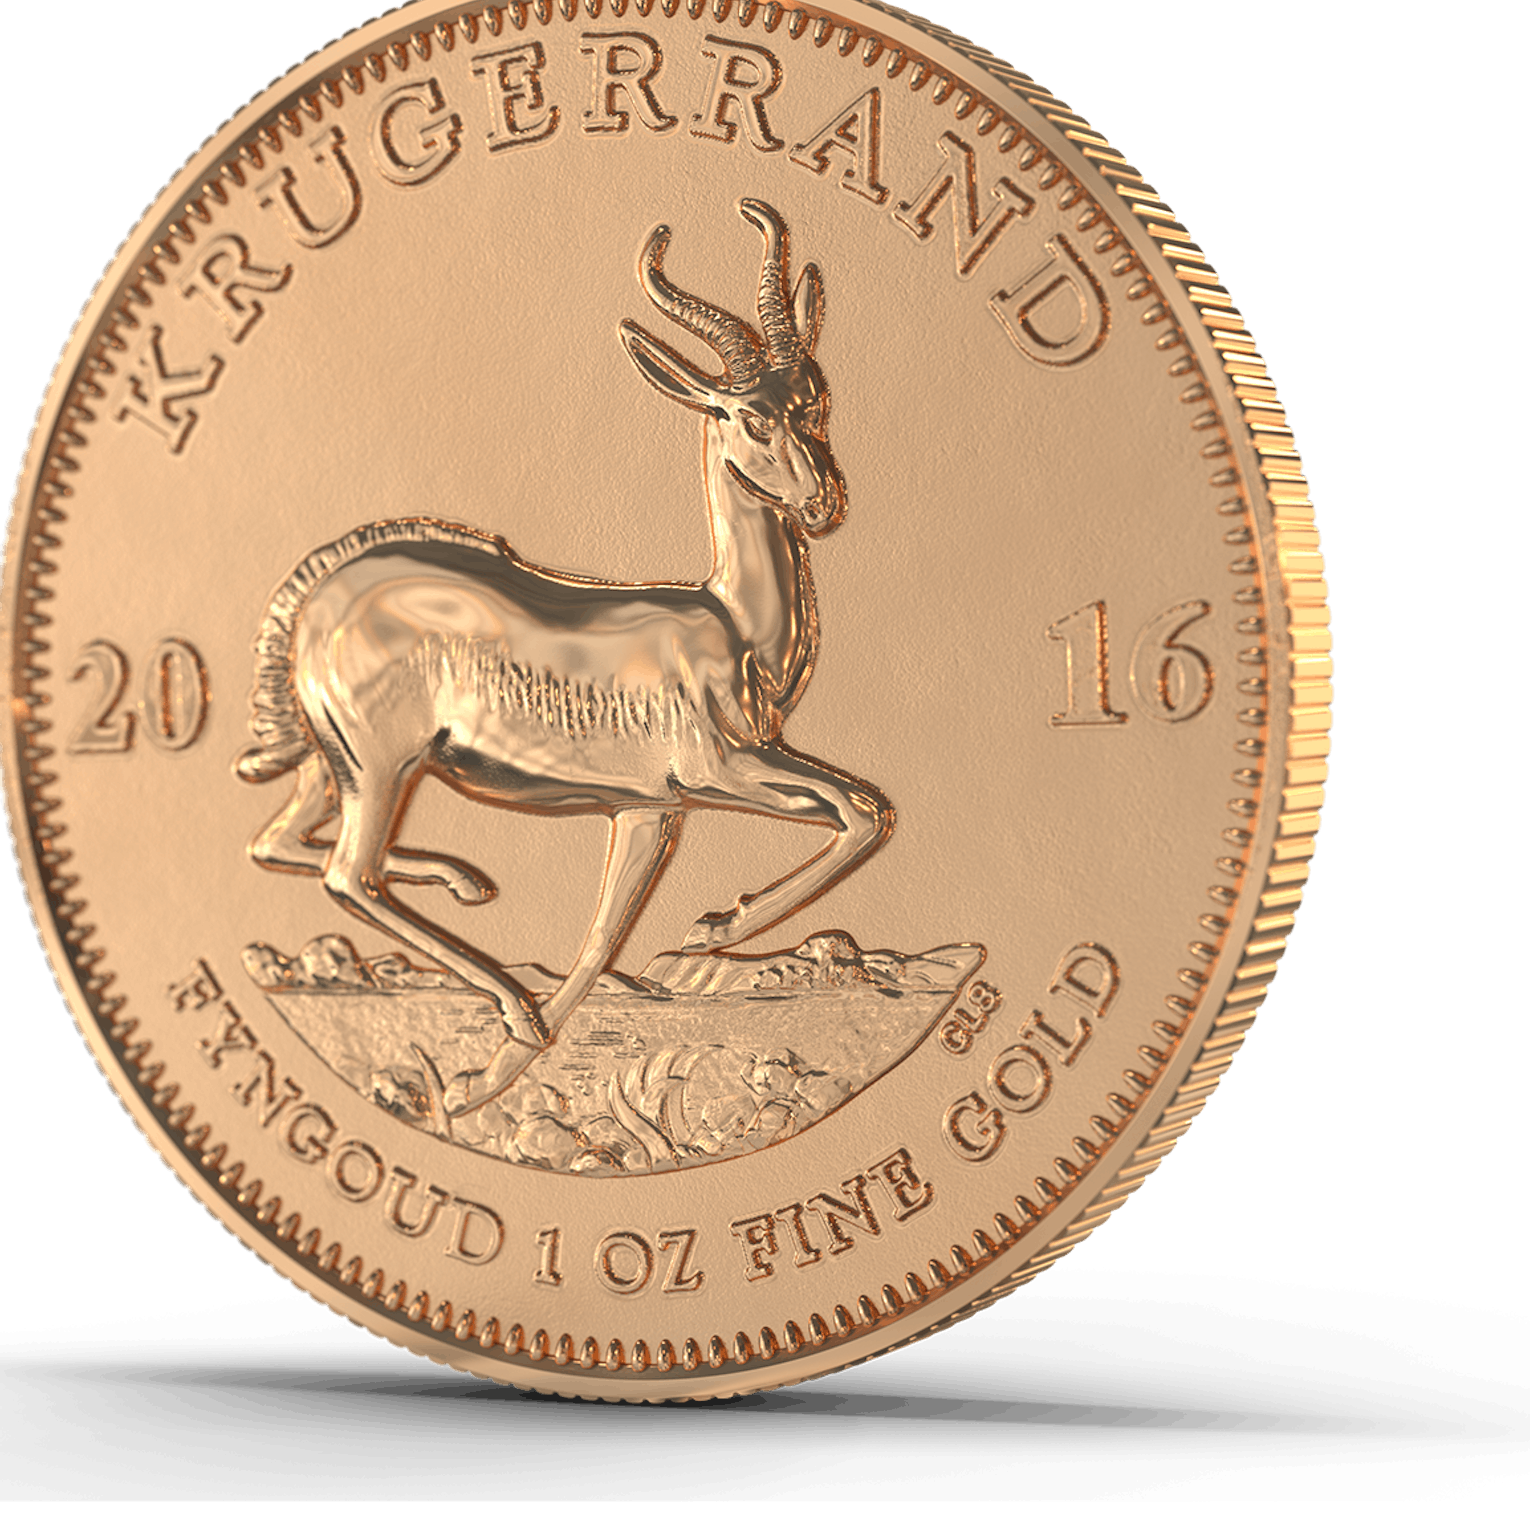 The Krugerrand from South Africa is the most famous investment gold coin in the world today. 